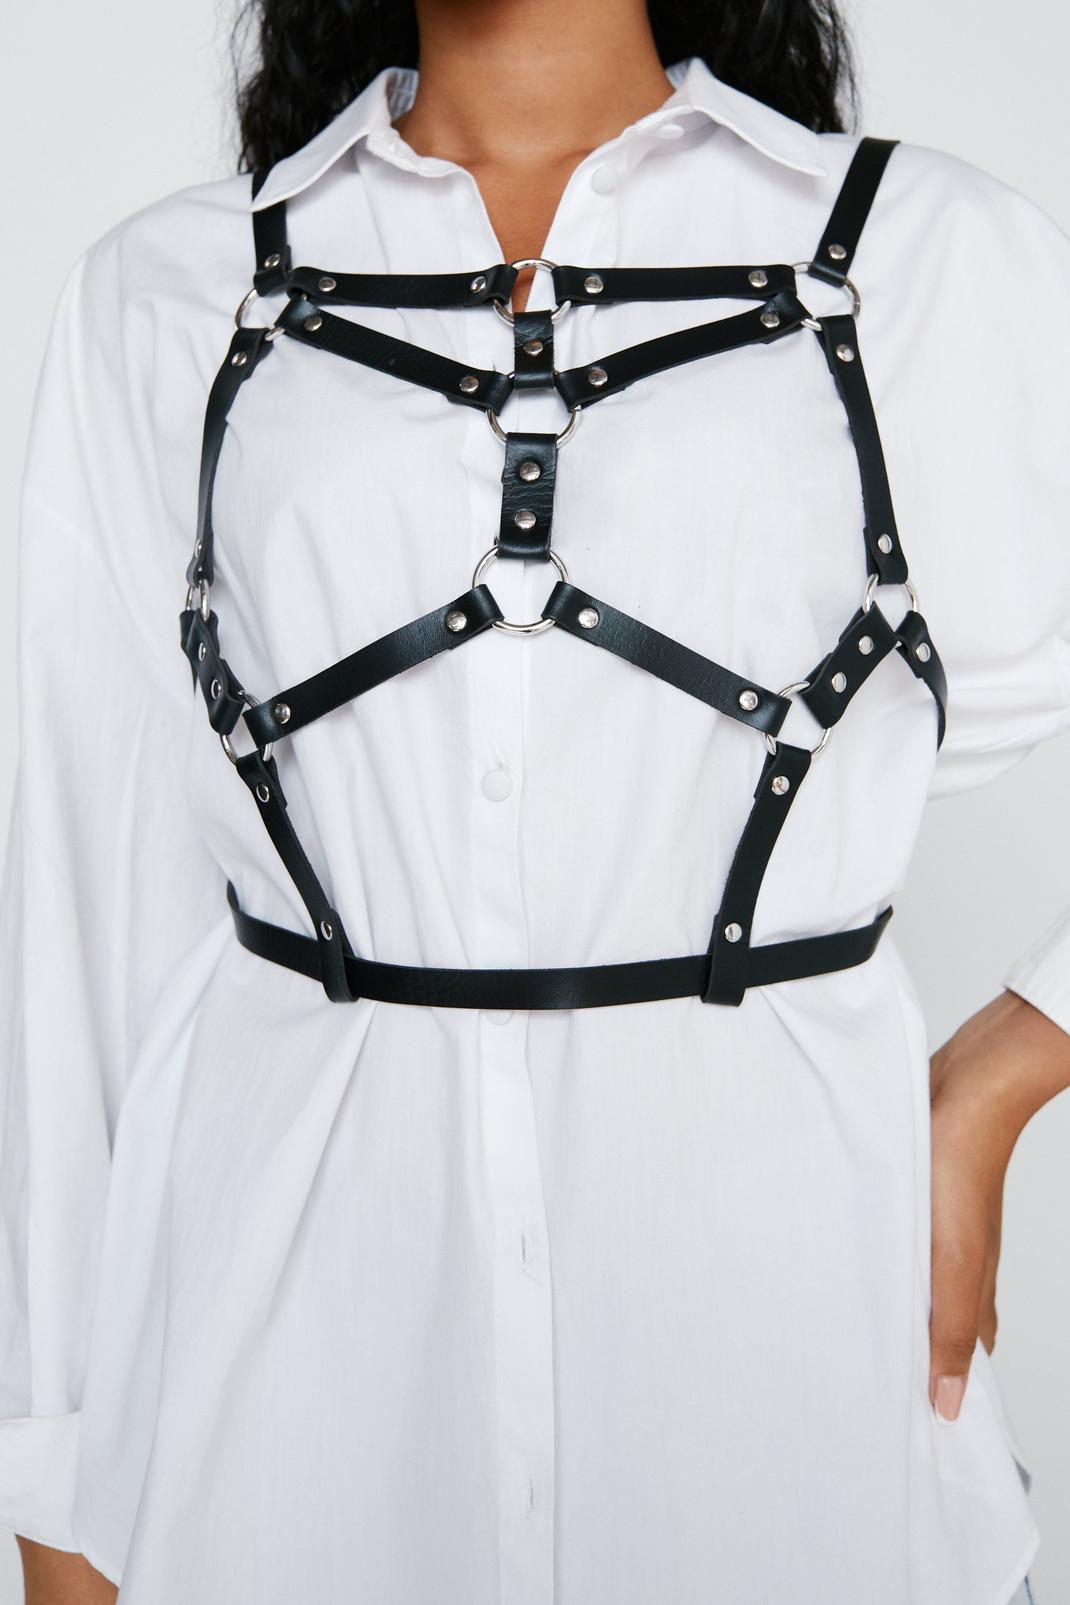 Faux Leather Body Harness | Nasty Gal